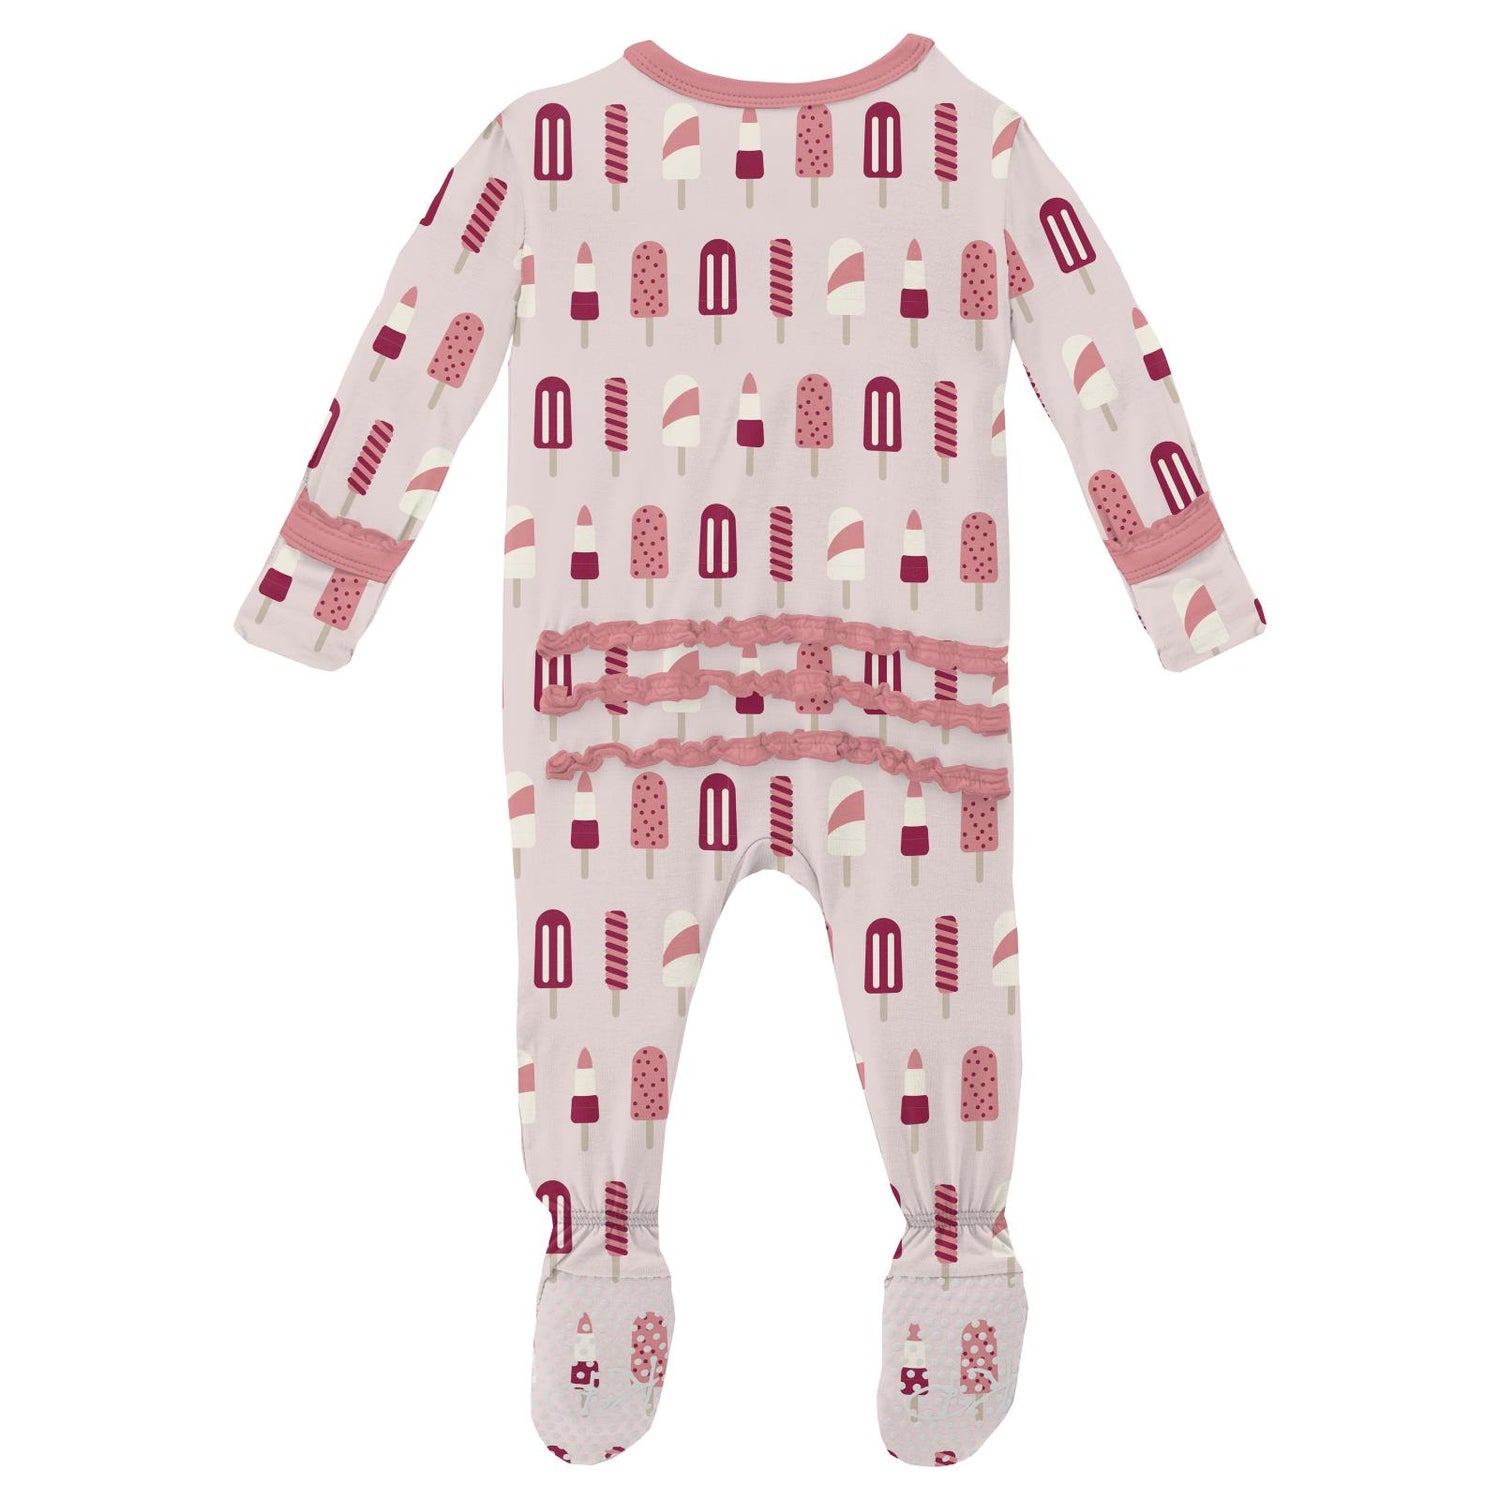 Print Muffin Ruffle Footie with Zipper in Macaroon Popsicles